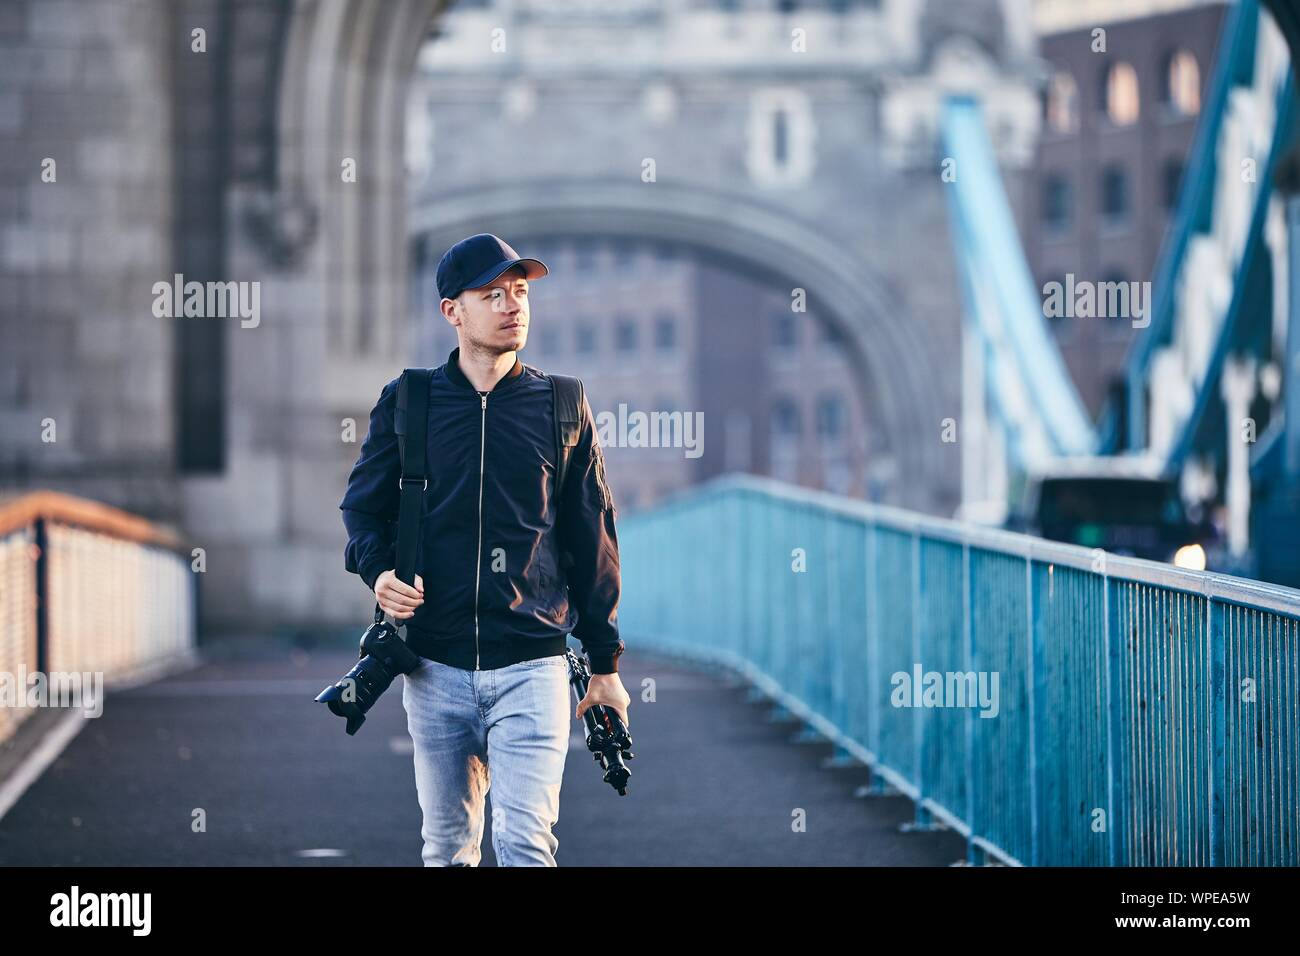 Photographer looking away while carrying camera and tripod against Tower Bridge. London, United Kingdom. Stock Photo